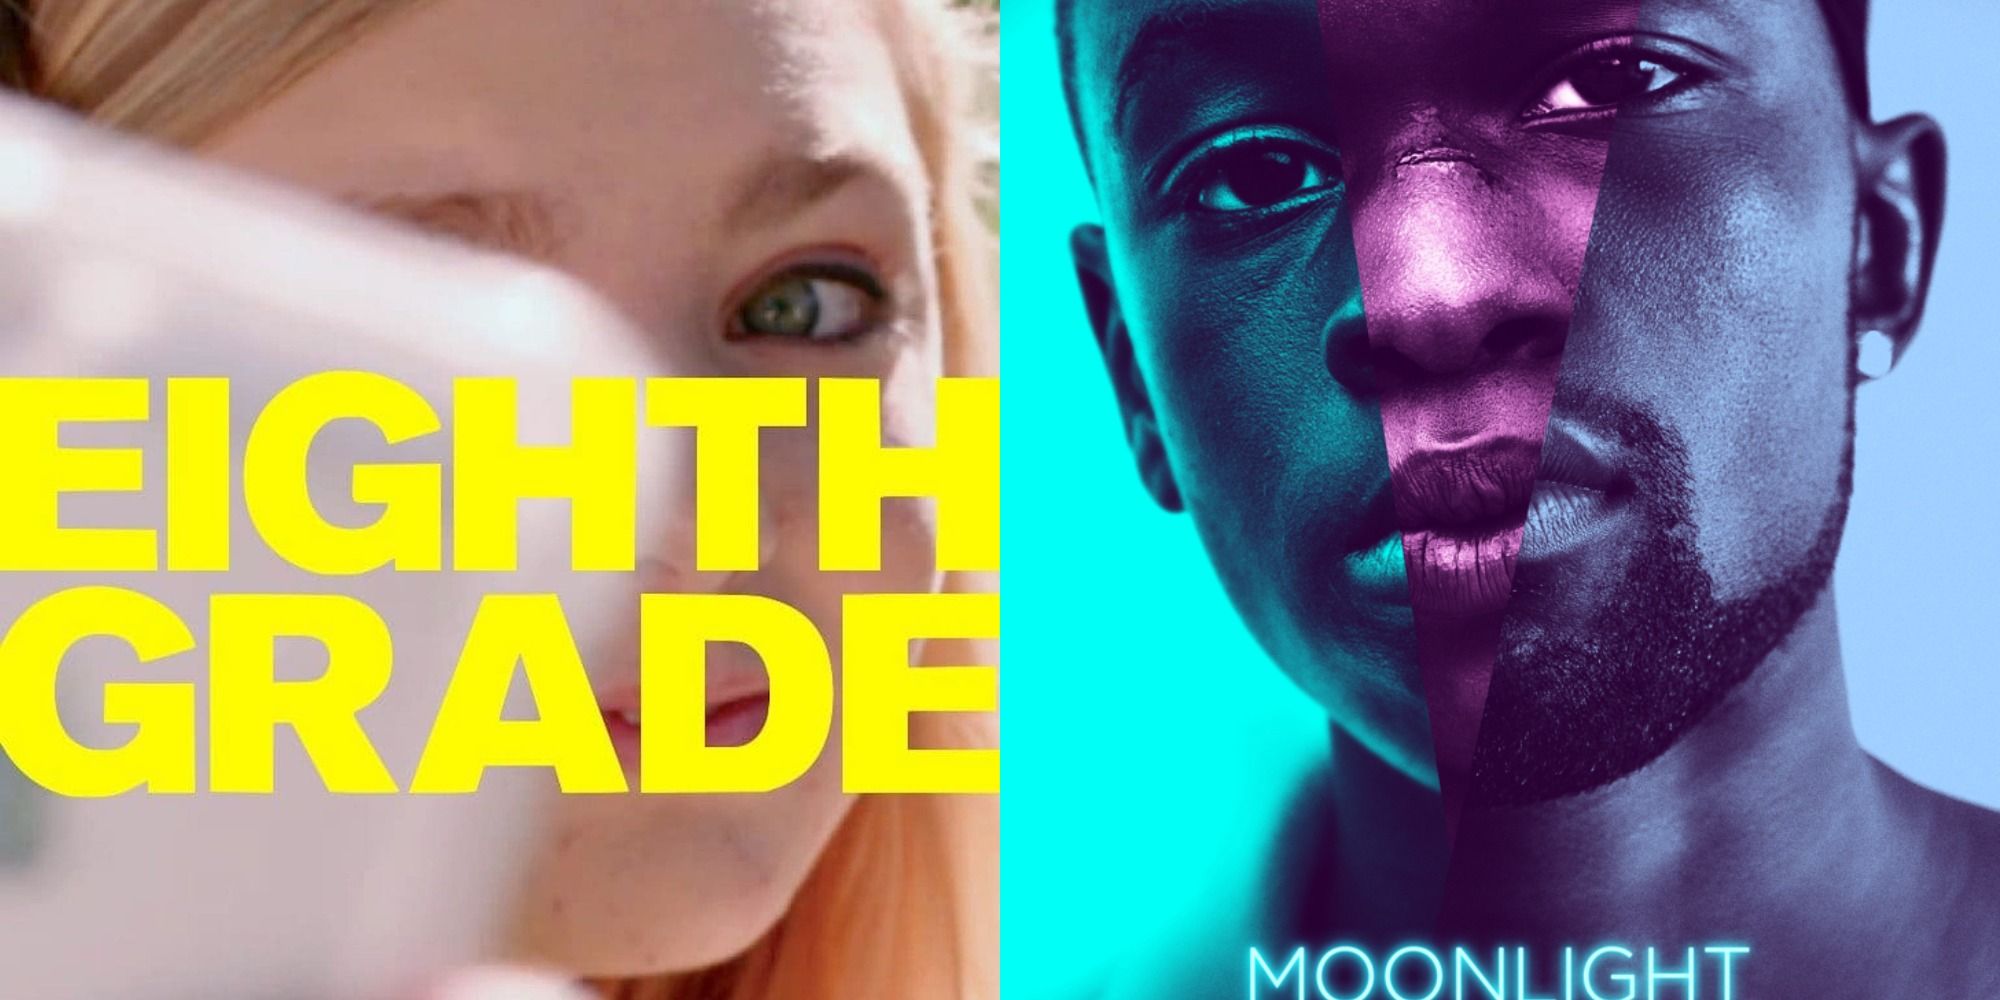 Split image showing the posters of Eighth Grade and Moonlight